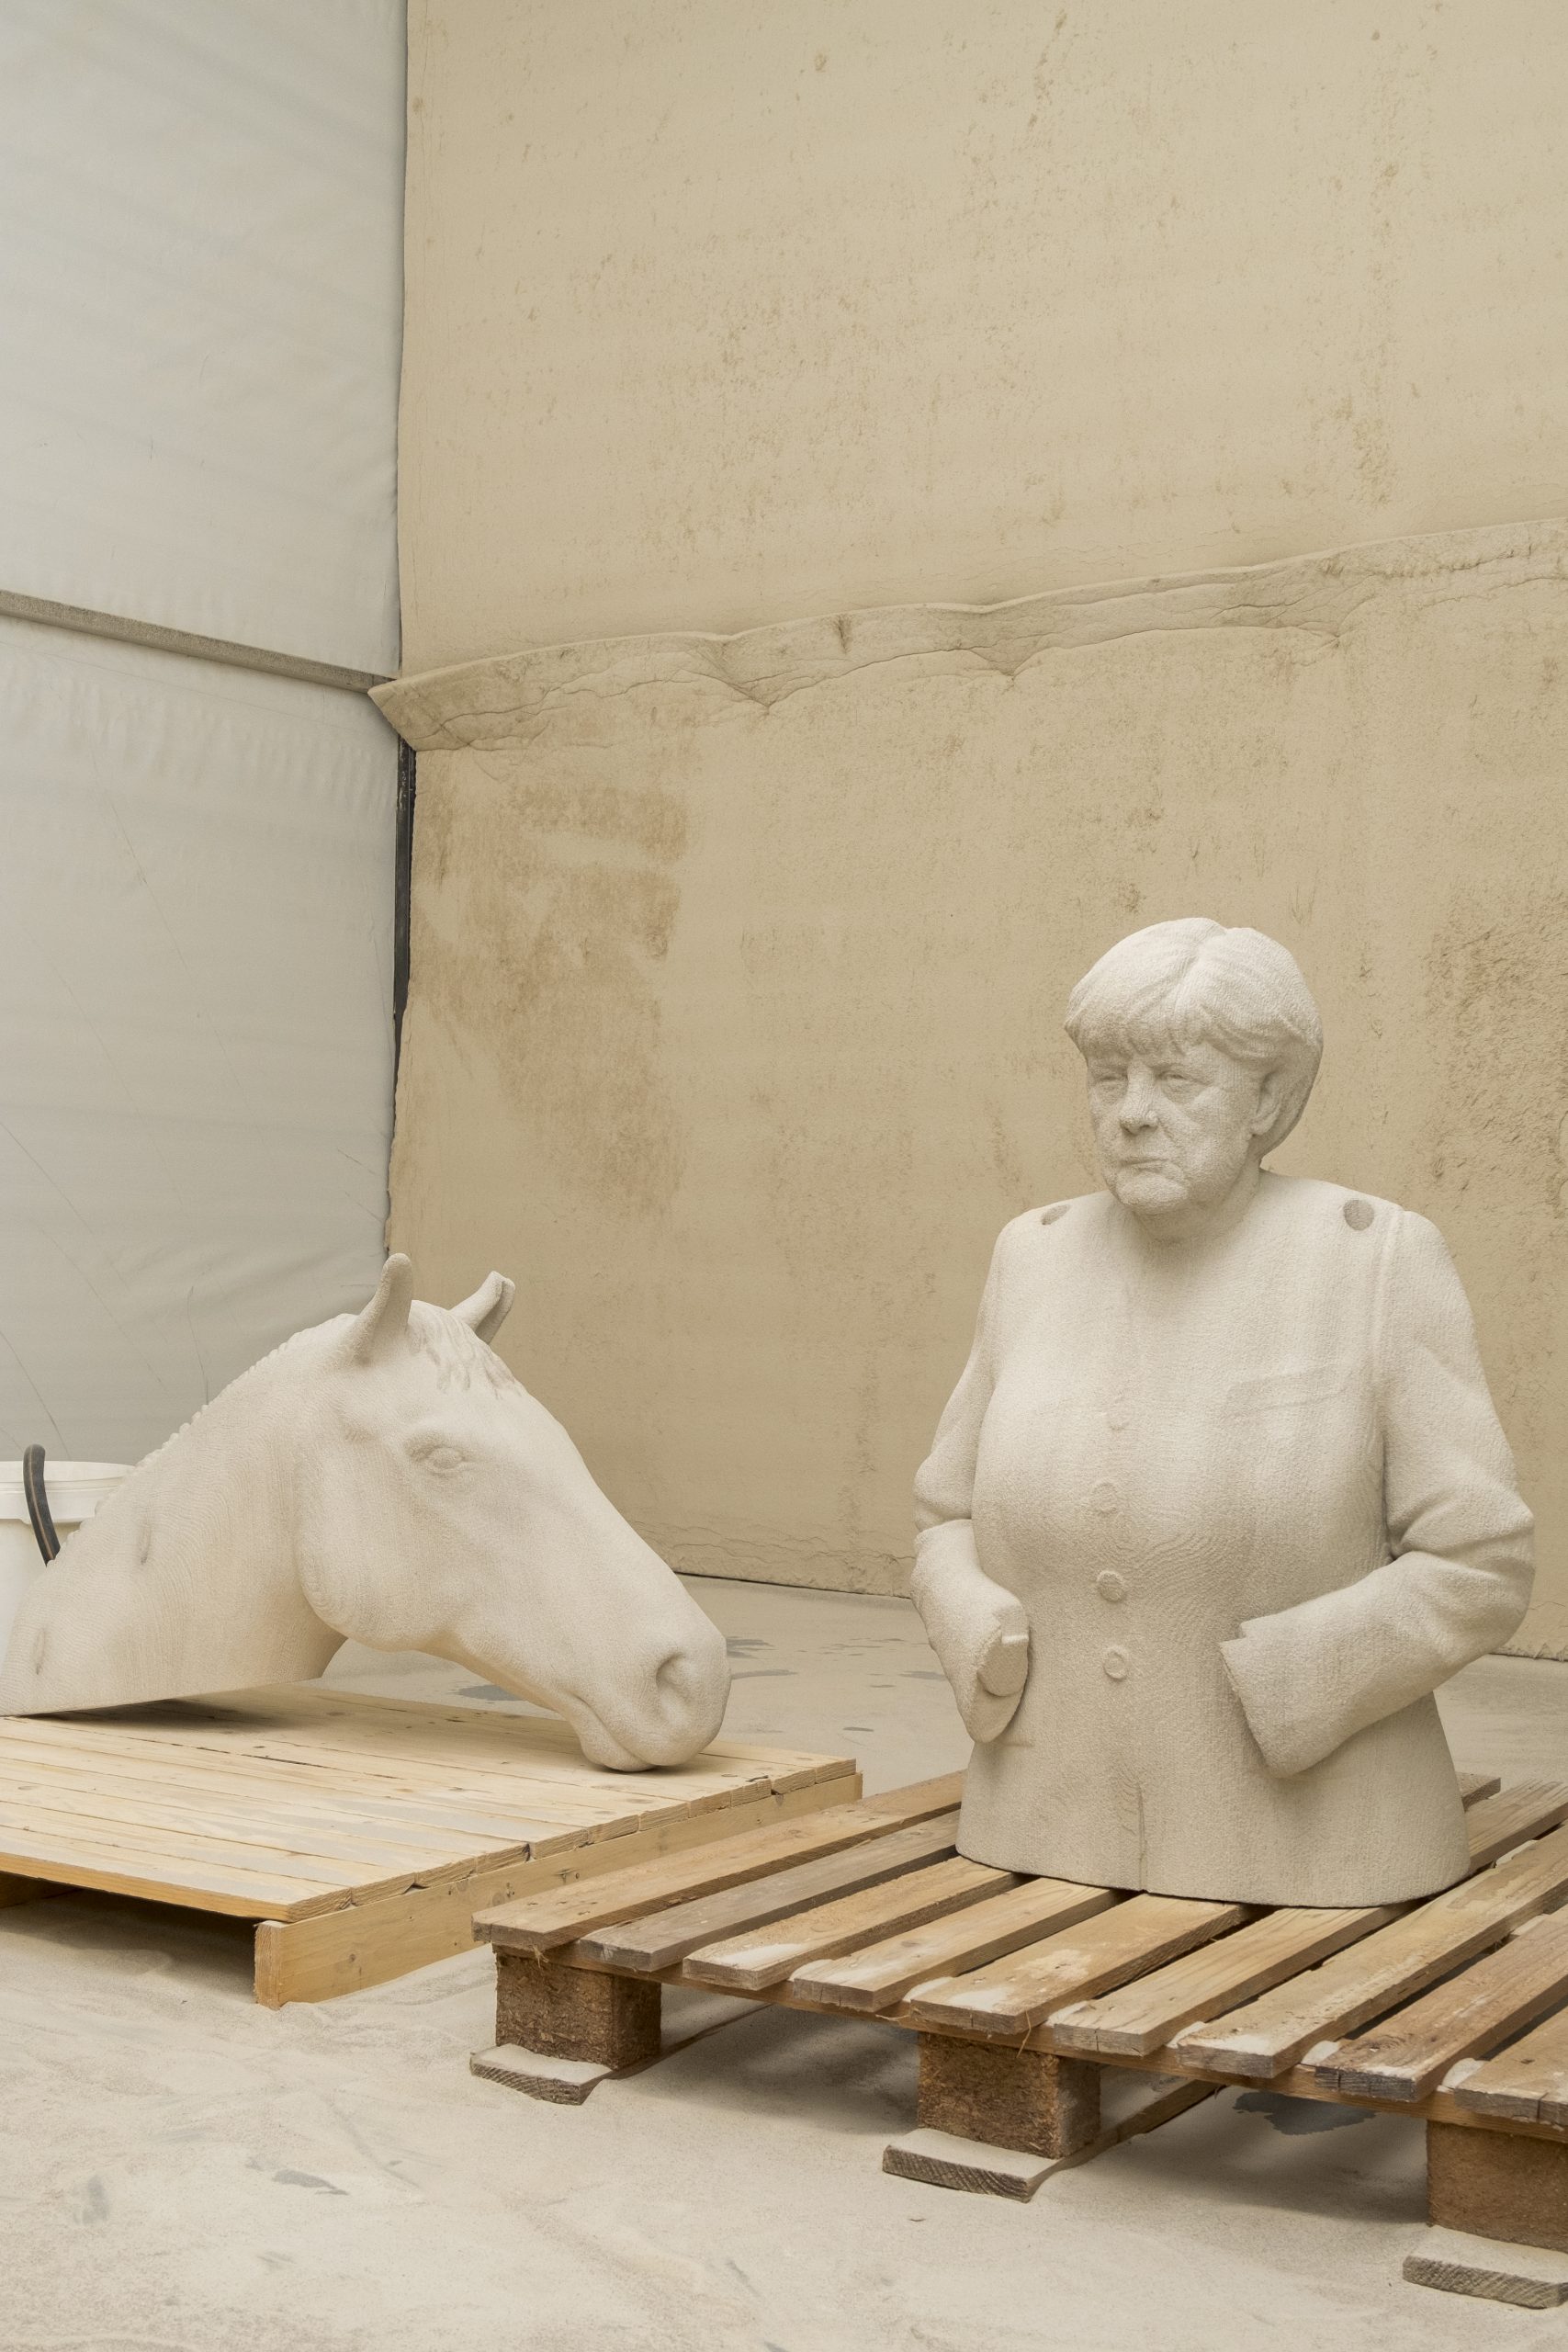 parts of 3d printed equestrian angela merkel during fabrication process